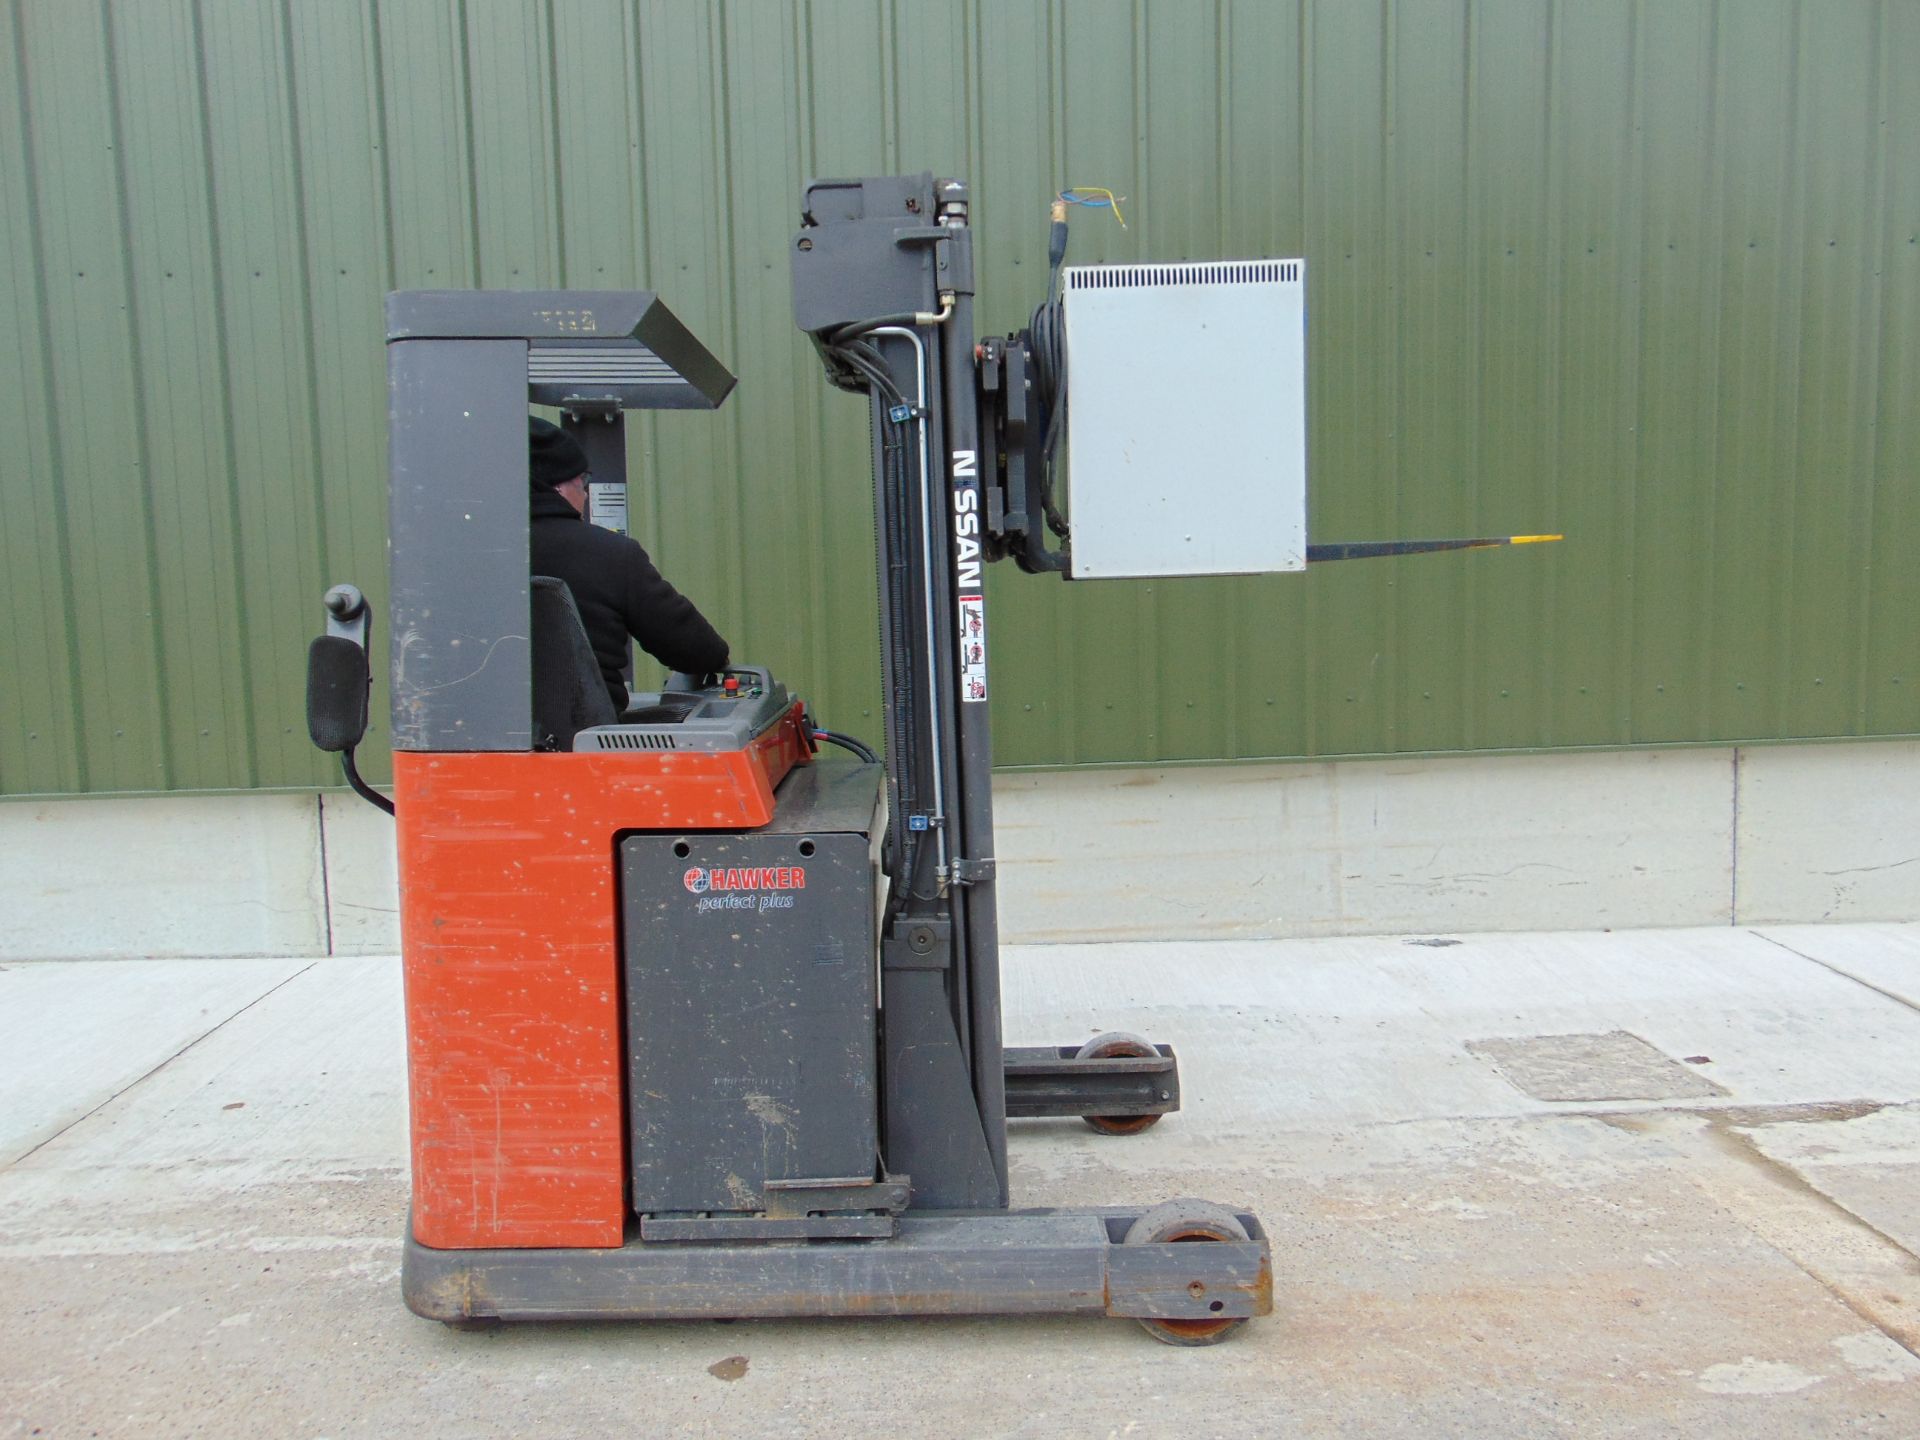 Nissan UNS-200 Electric Reach Fork Lift w/ Battery Charger Unit 2283 hrs - Image 14 of 31